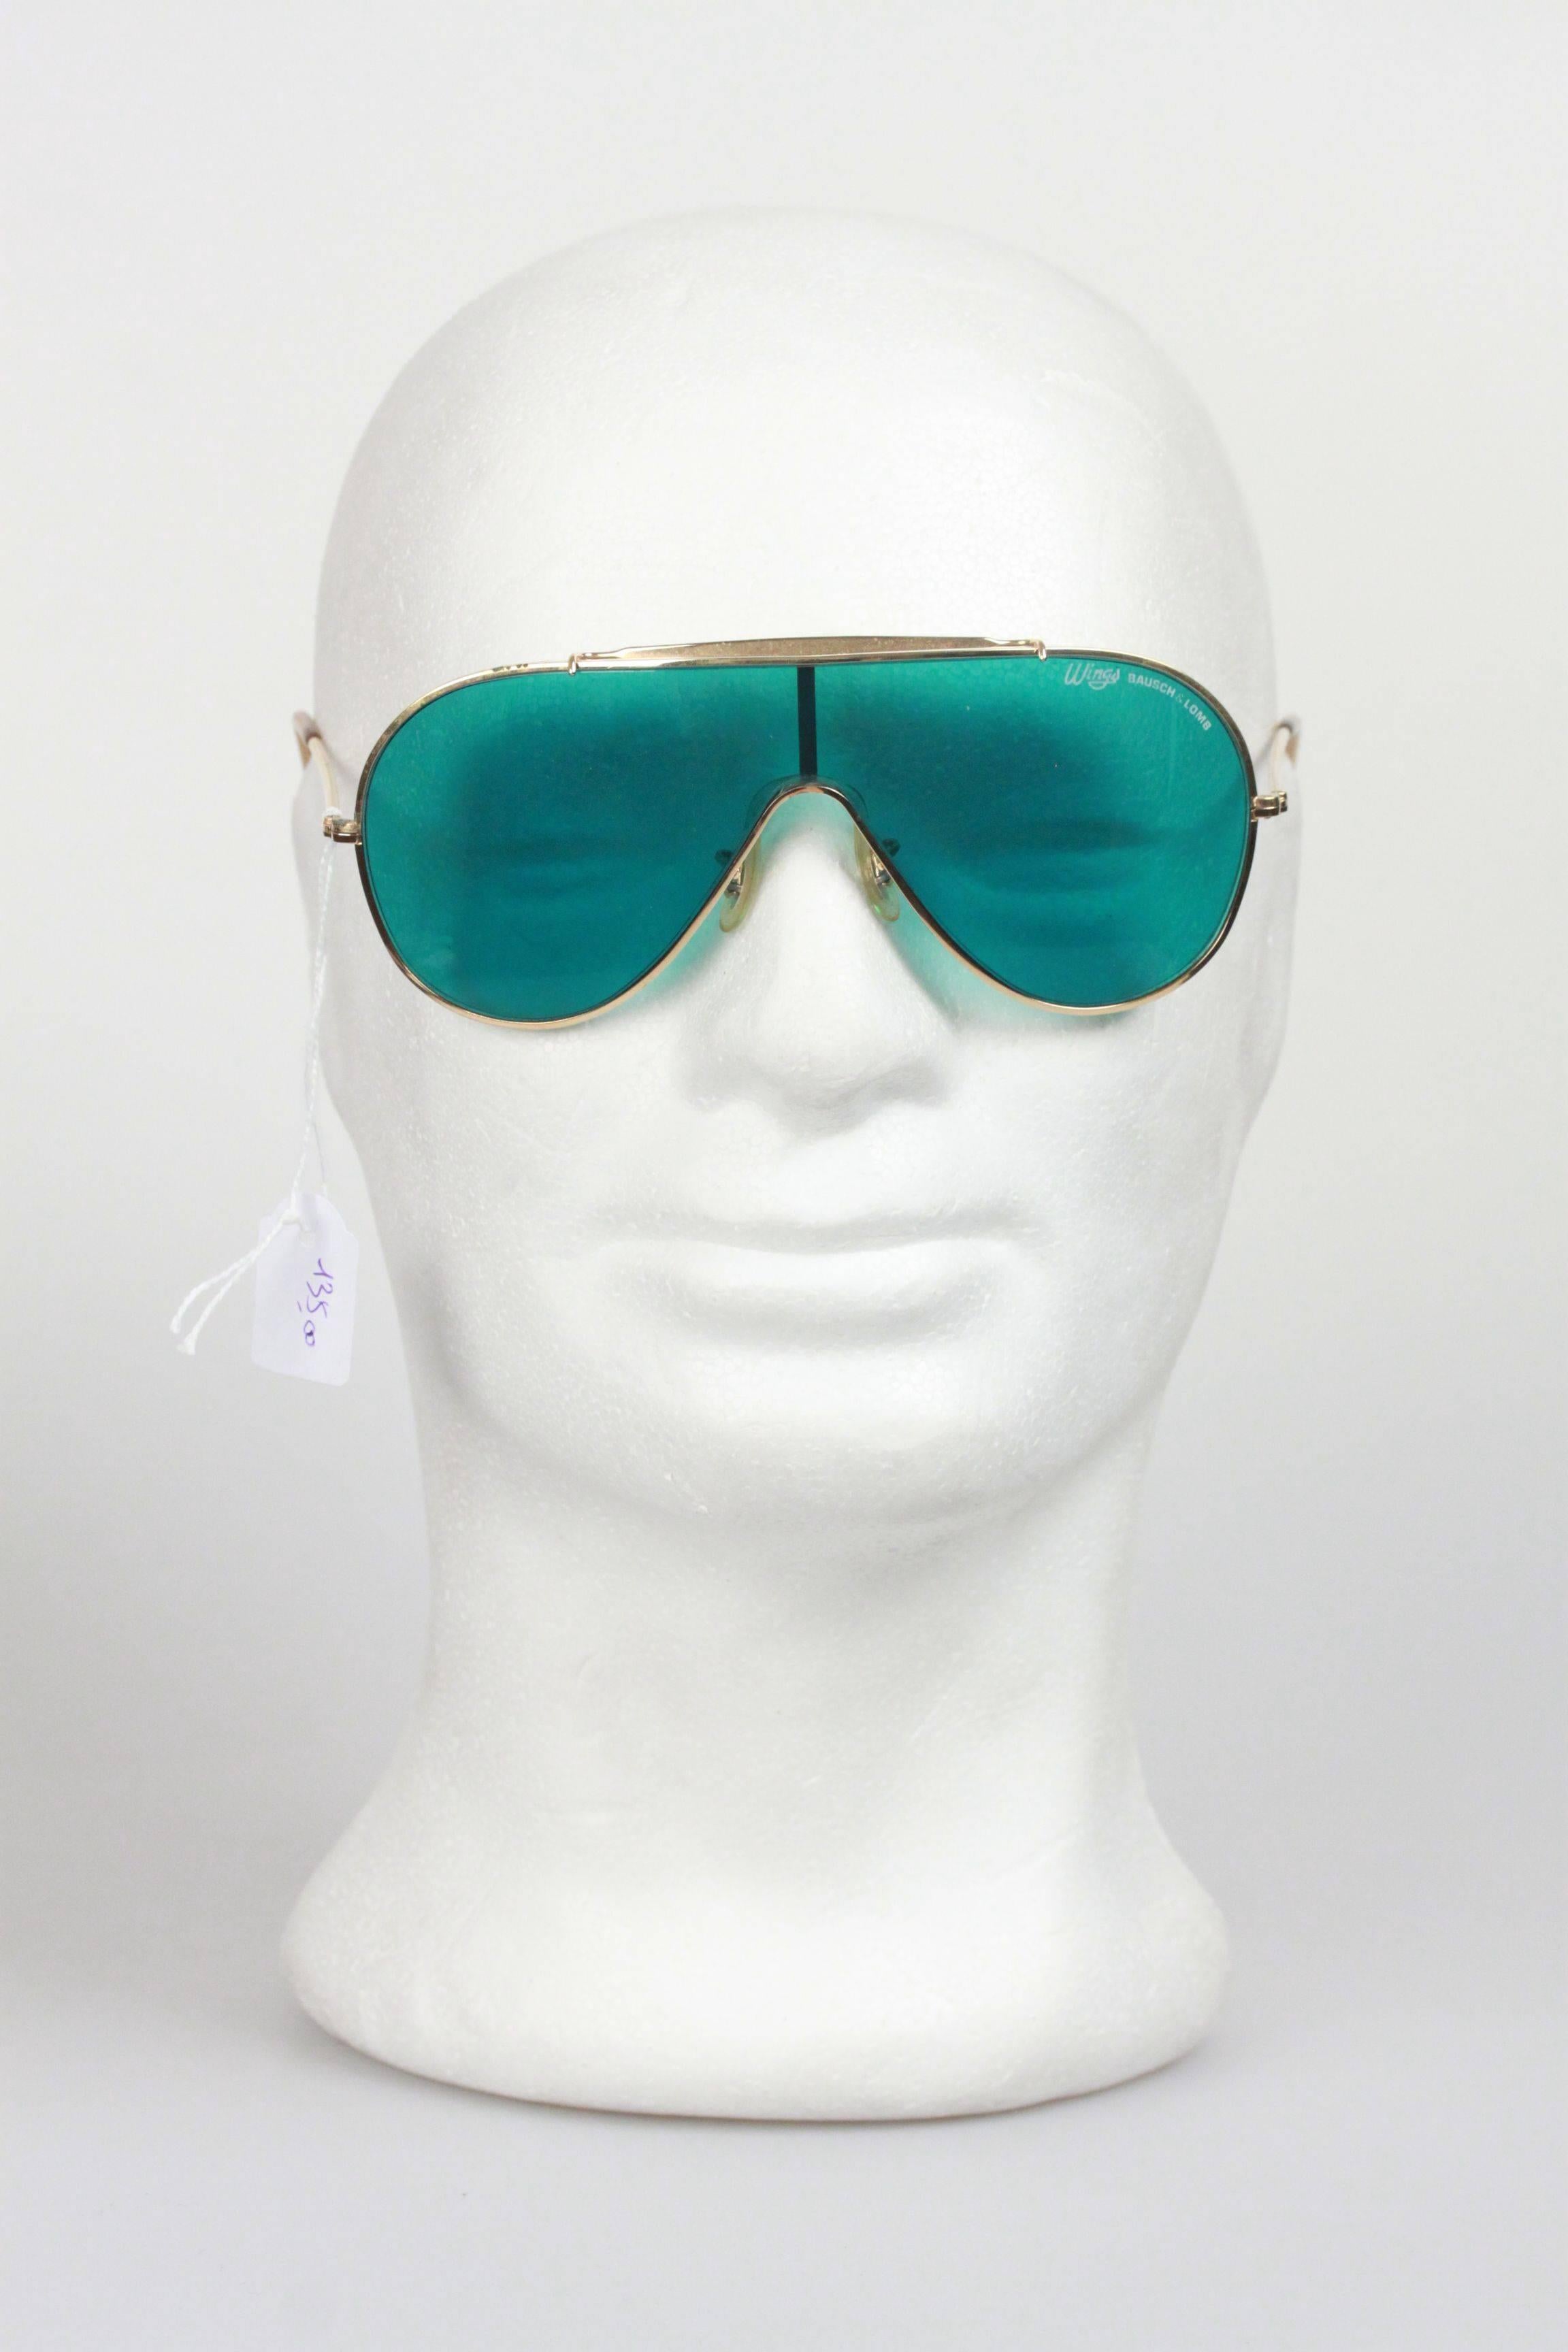 - Vintage Bausch & Lomb Ray-Ban Wings
- Original BAUSCH & LOMB one-piece lens in  green olor
- The gold brow bar improves the fit and feel against the face, 
- The top of the nose bridge is marked B&L Ray-Ban USA
- The lens is laser etched 